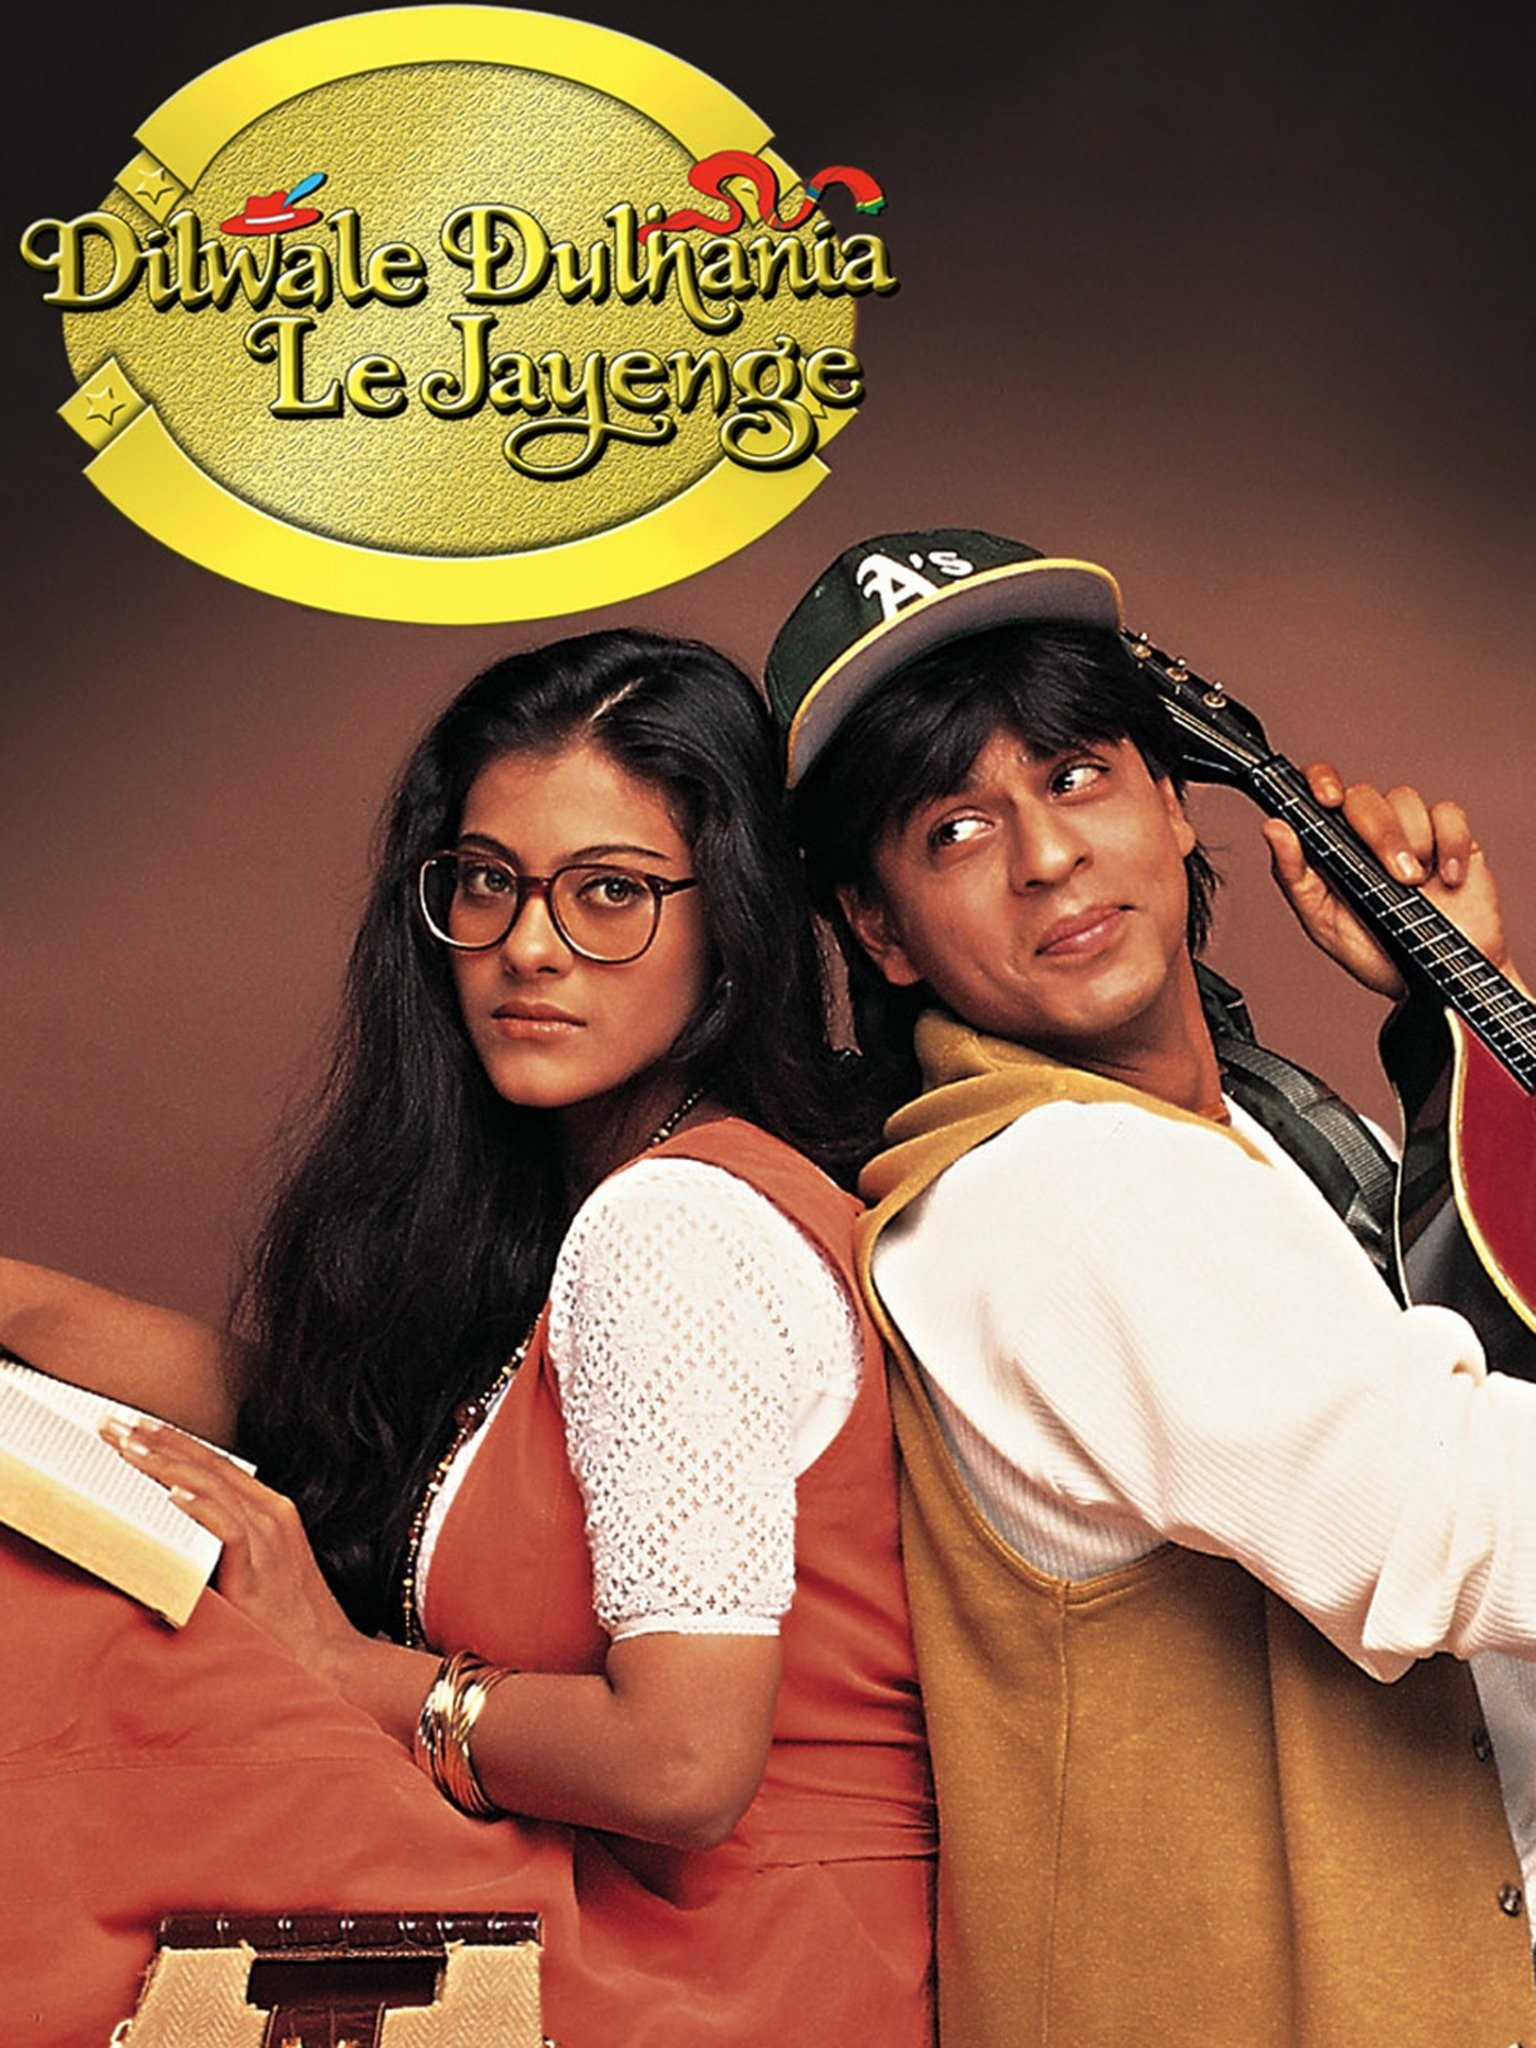 Best moments from the movie Dilwale Dulhania Le Jayenge